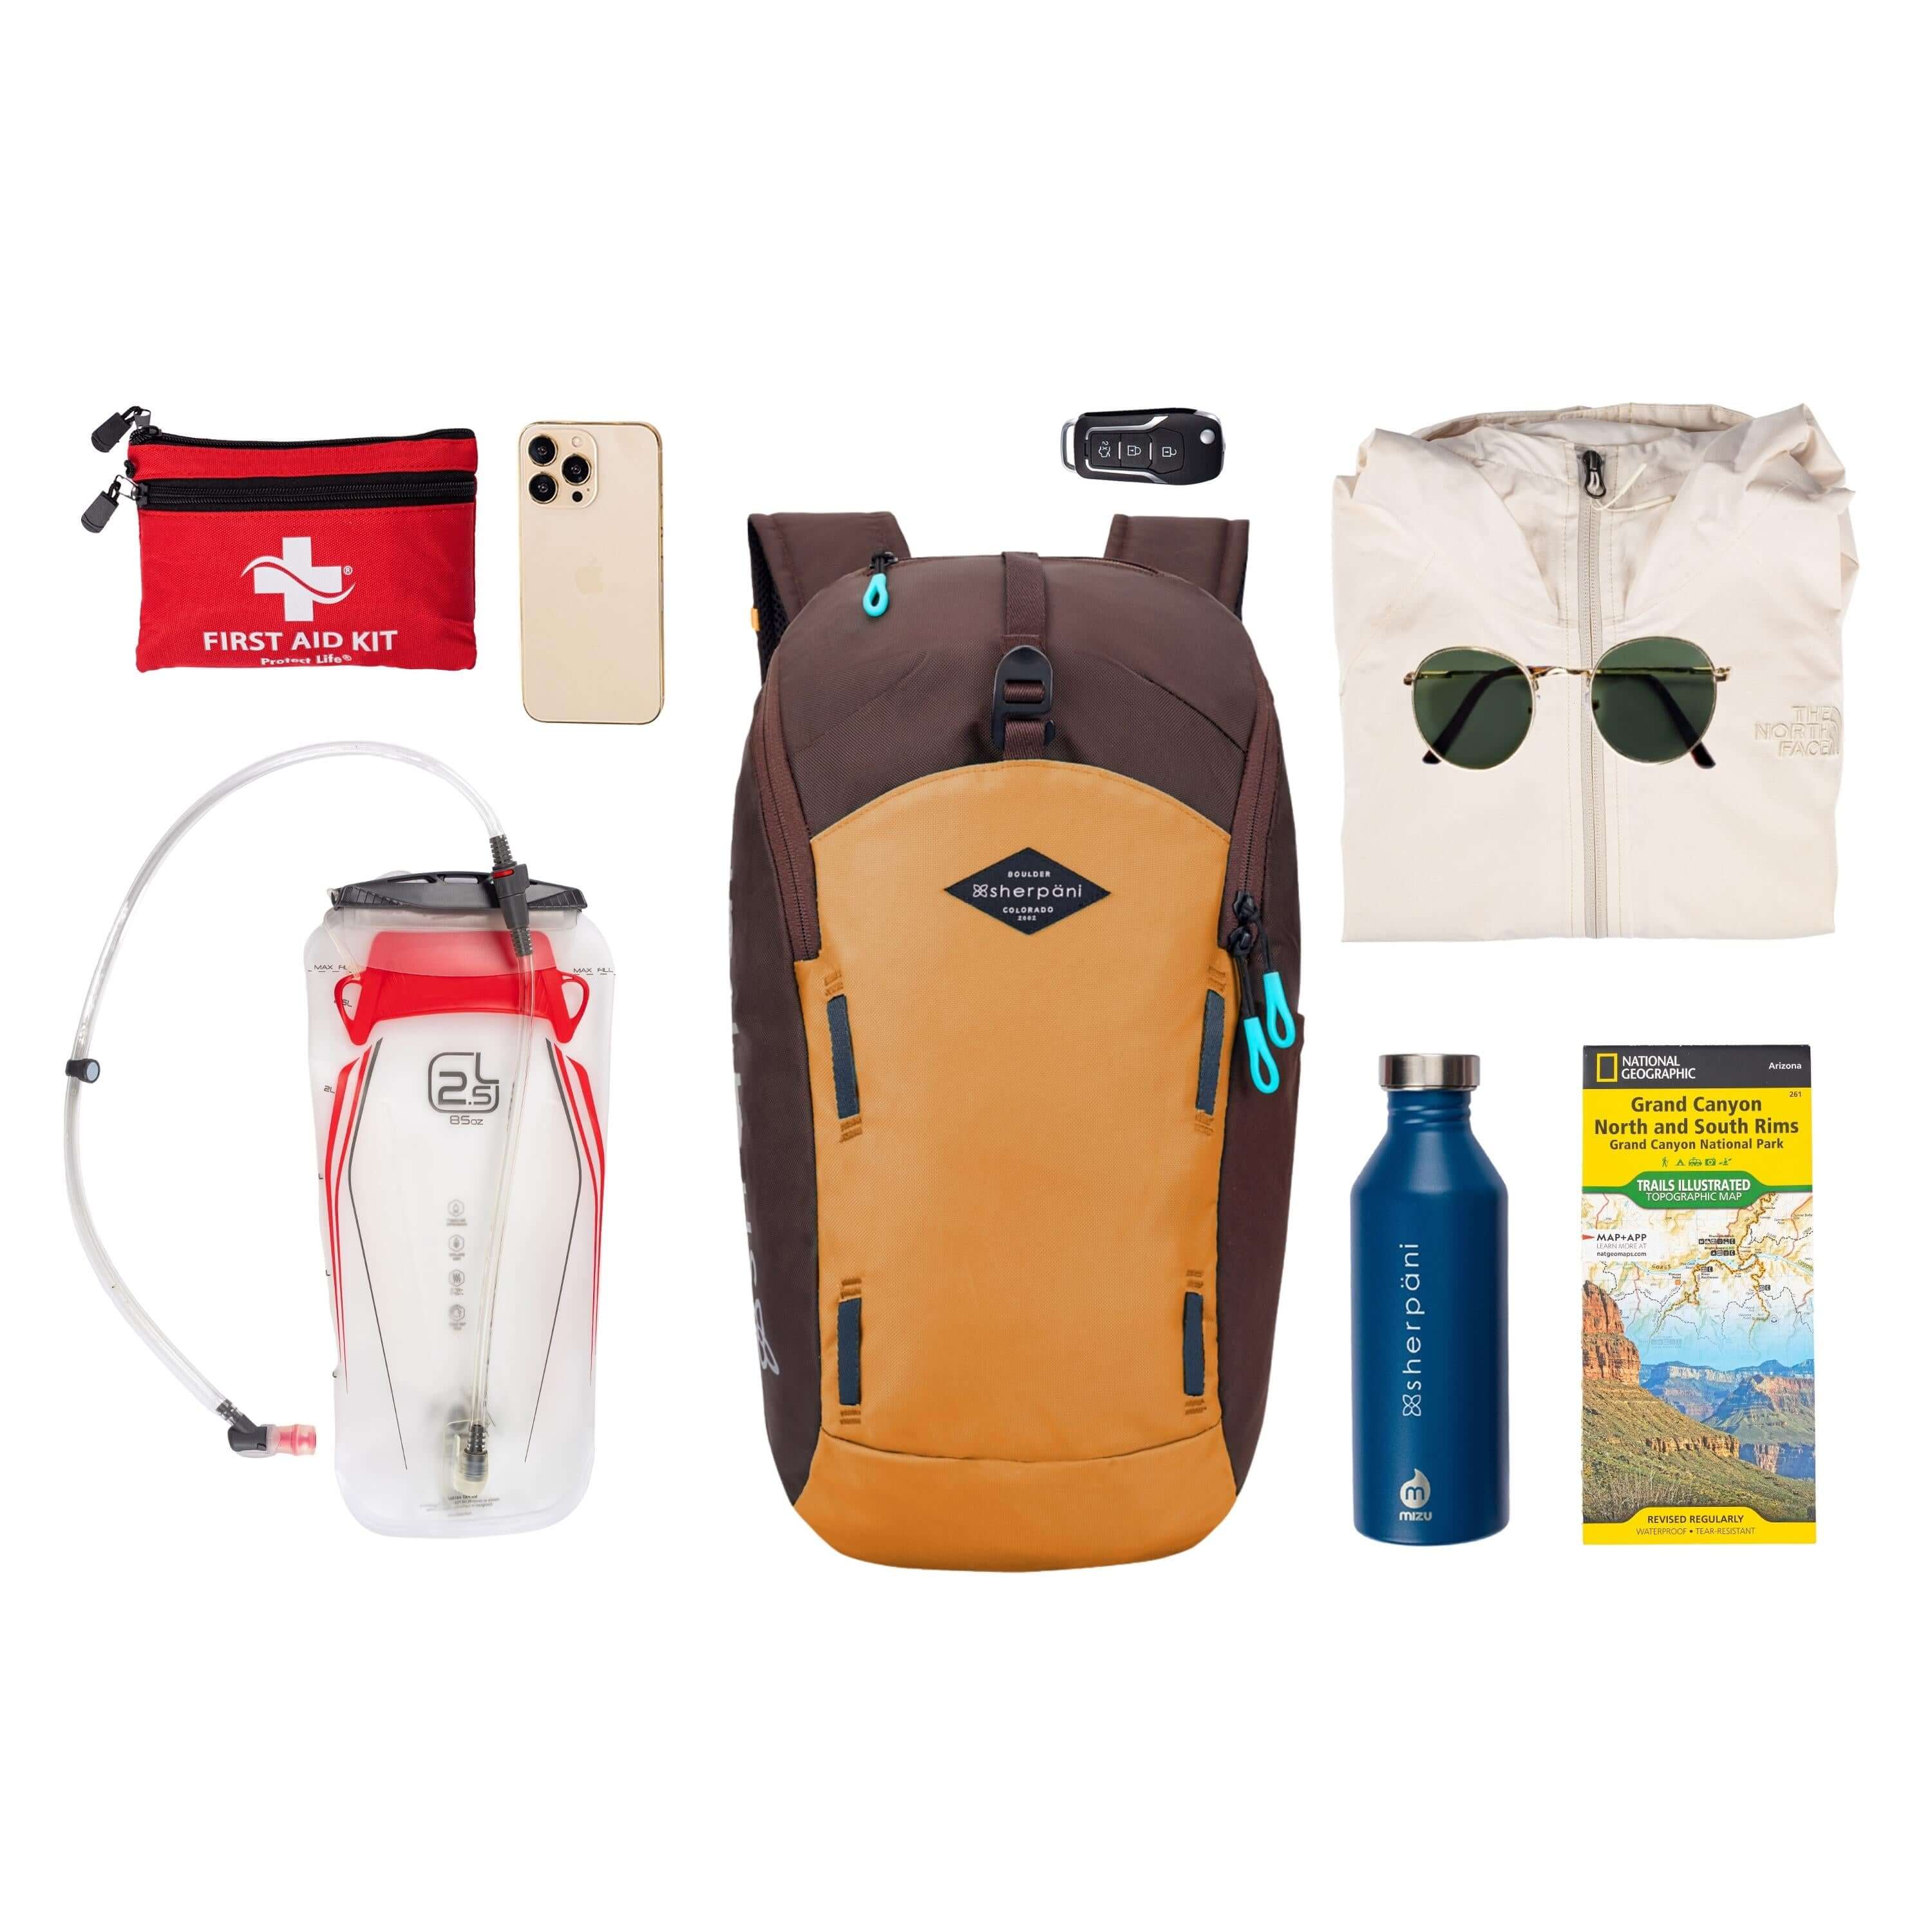 Top view of example items to fill the bag. Sherpani backpack, the Switch in Sundial, lies in the center. It is surrounded by an assortment of items: first aid kit, phone, hydration reservoir, car key, rain jacket, sunglasses, water bottle and hiking guide.